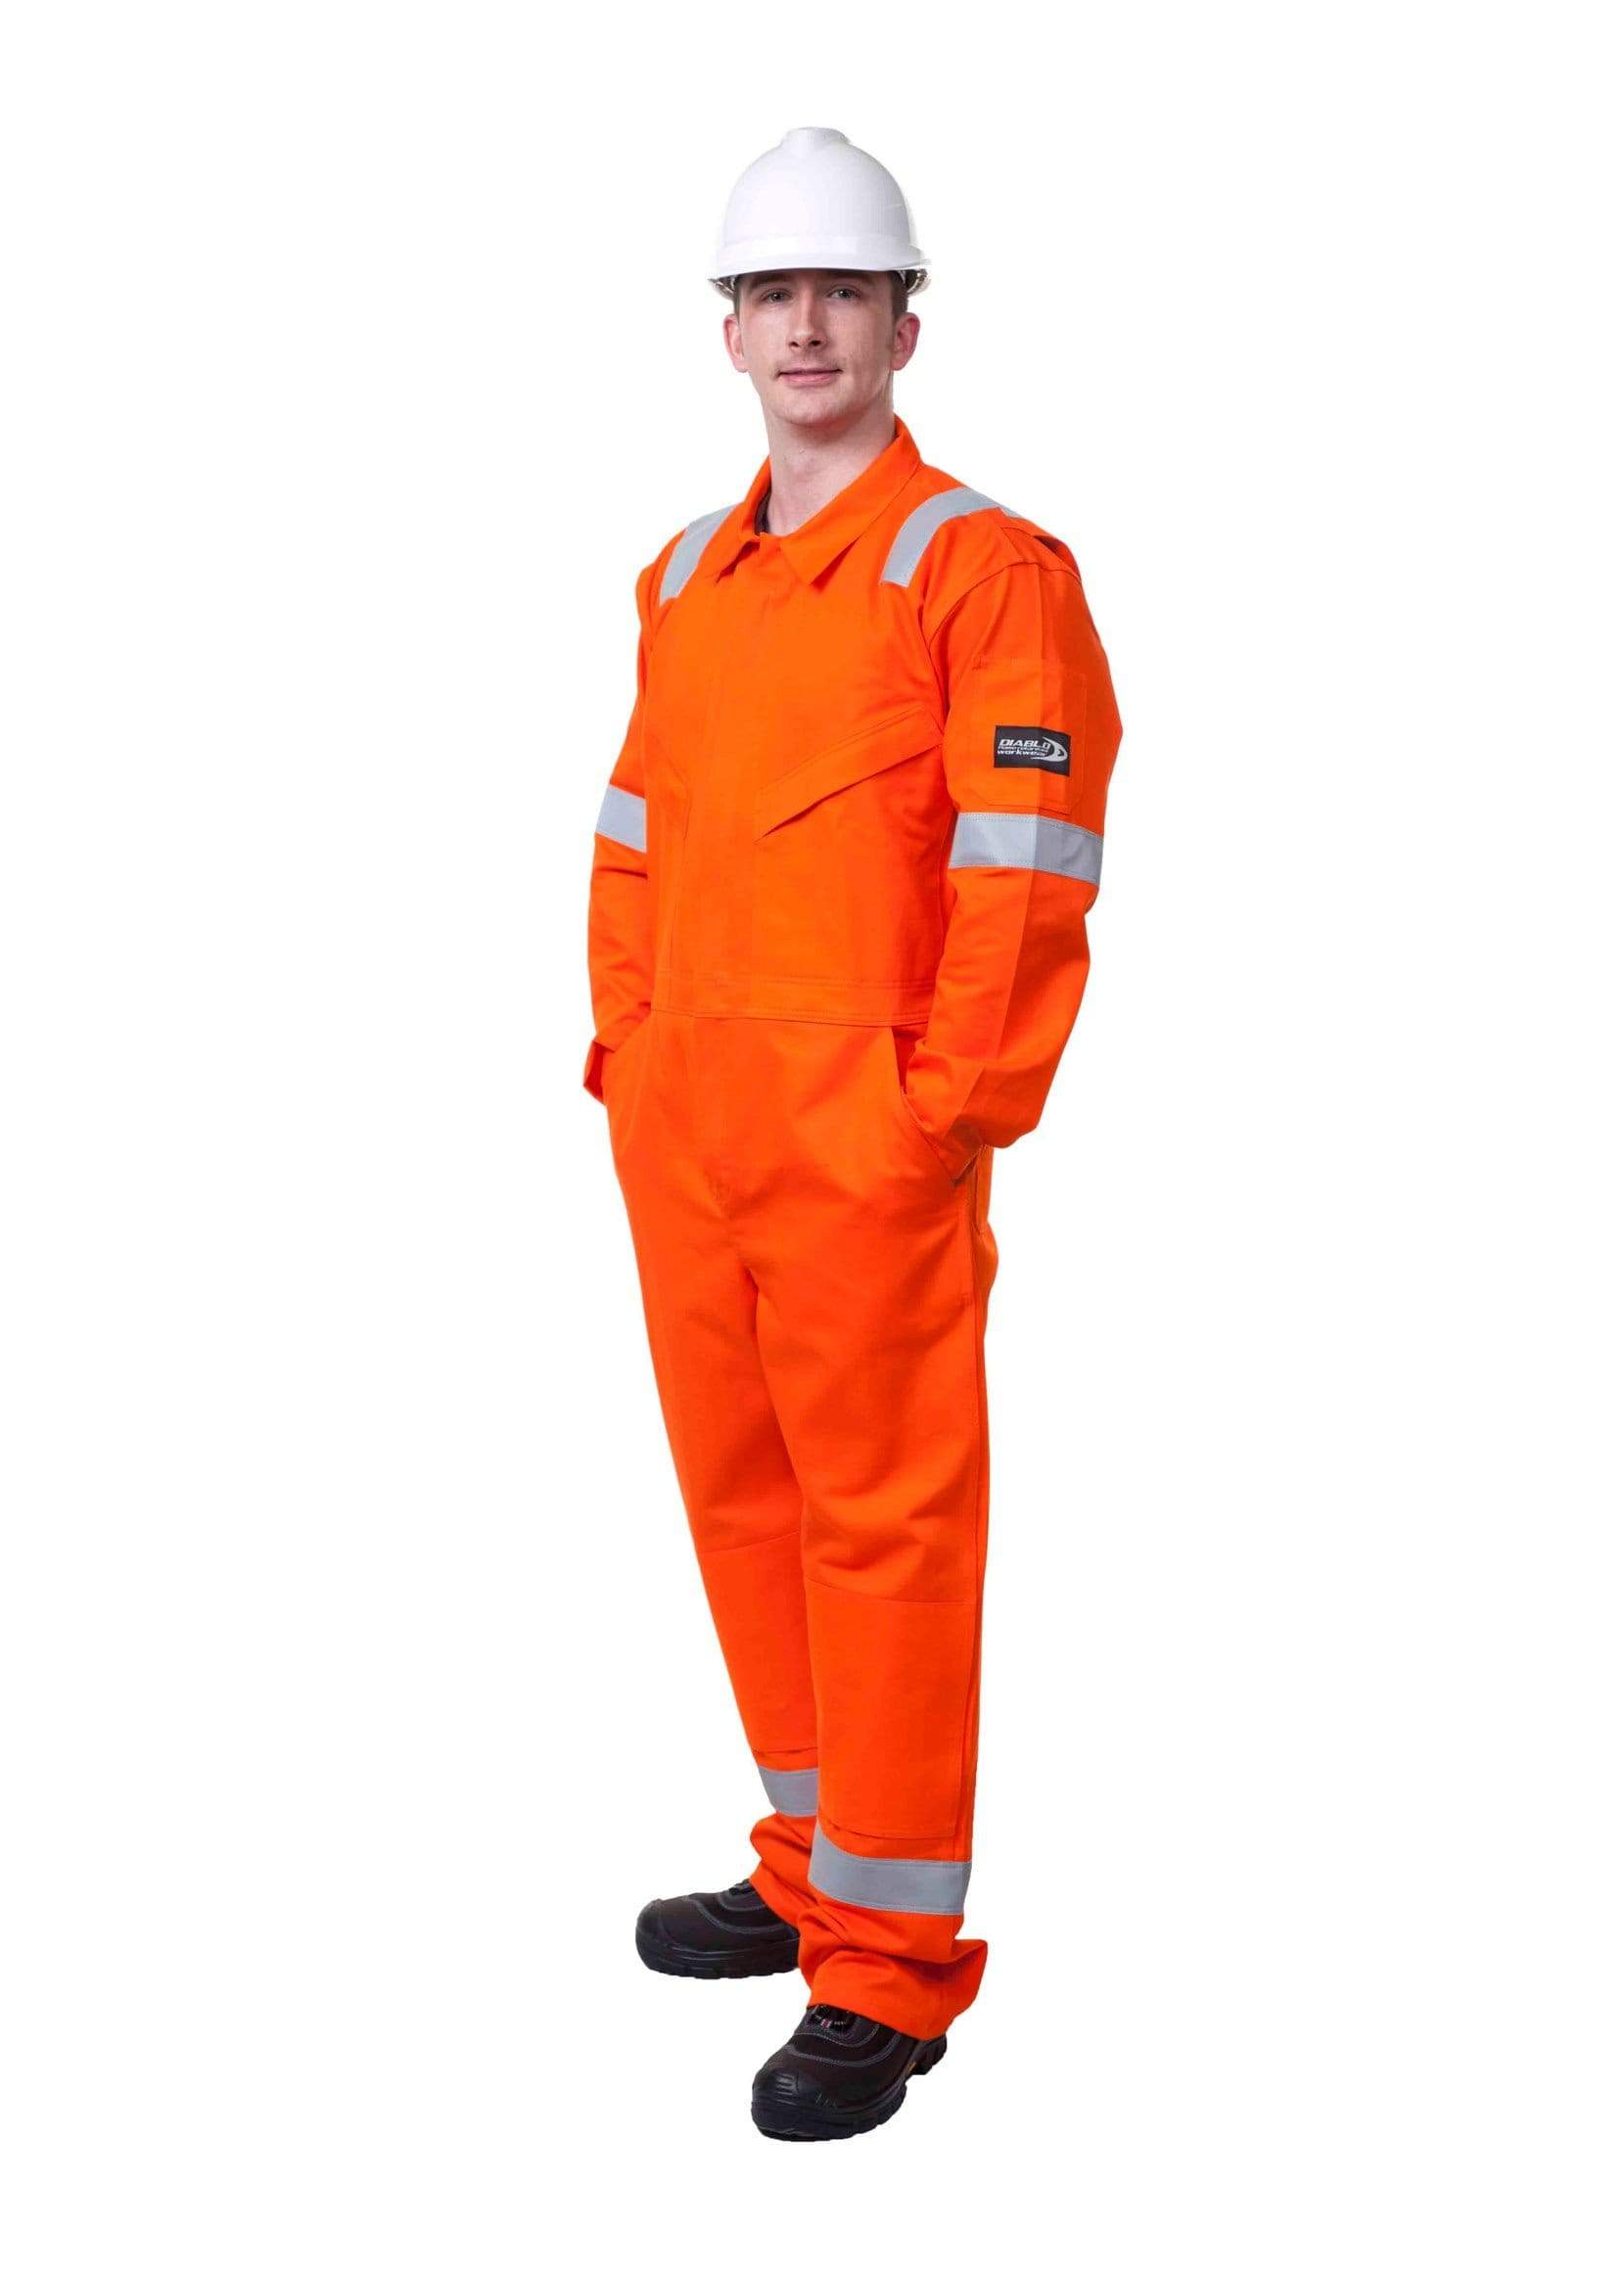 Invicto Flame Retardant Coverall With Reflector | Supply Master | Accra, Ghana Safety Clothing Buy Tools hardware Building materials